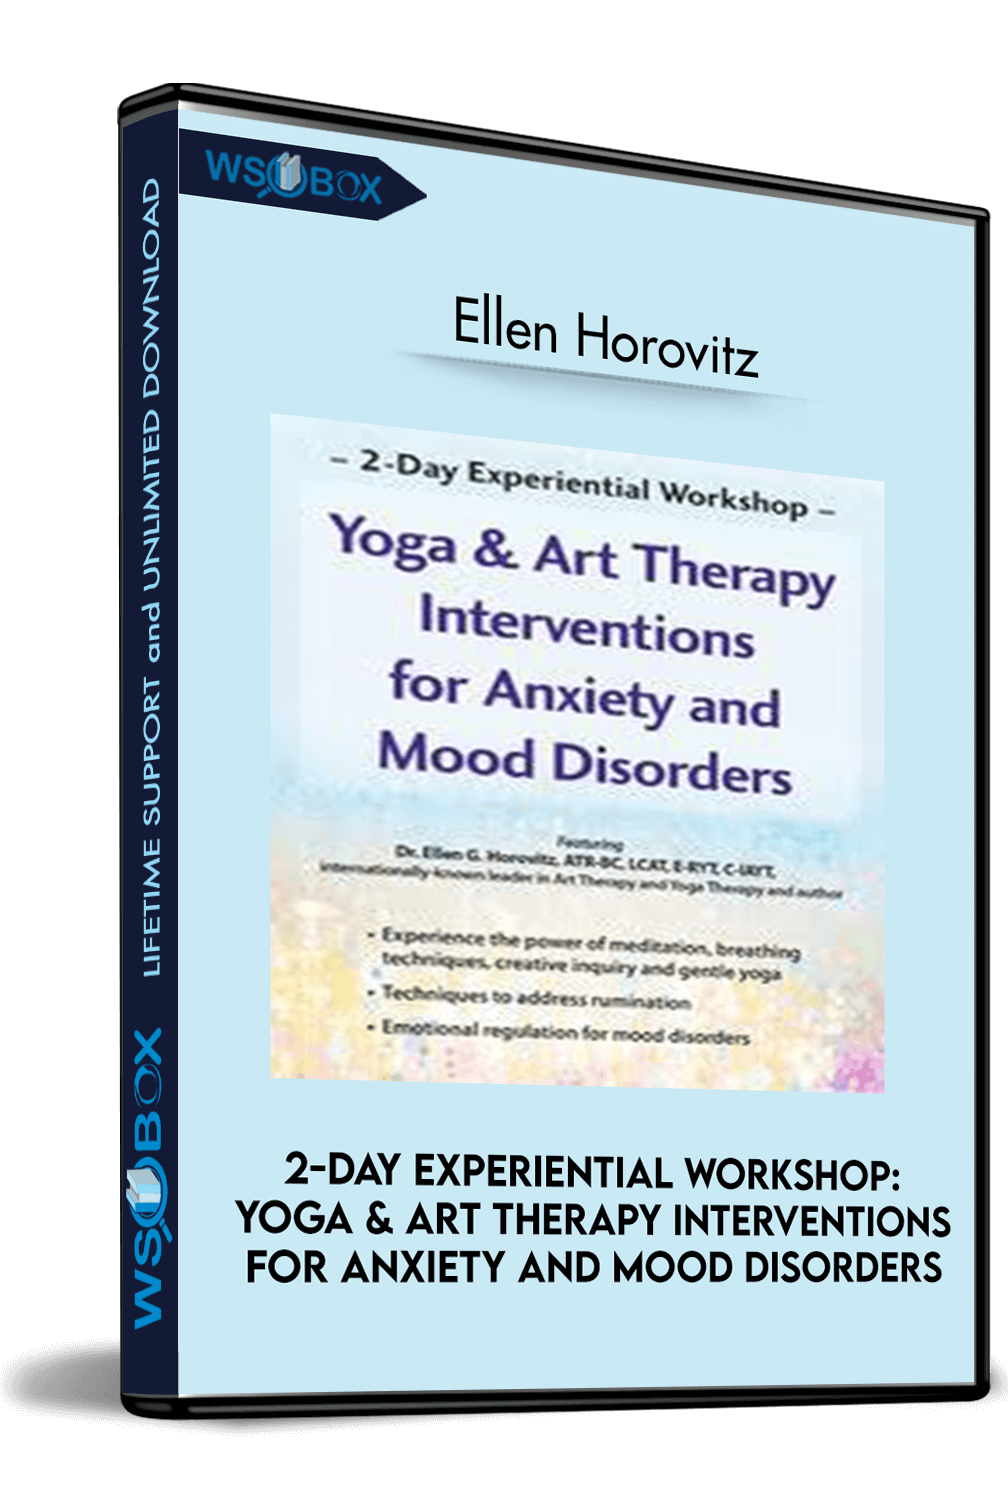 2-day-experiential-workshop-yoga-art-therapy-interventions-for-anxiety-and-mood-disorders-ellen-horovitz